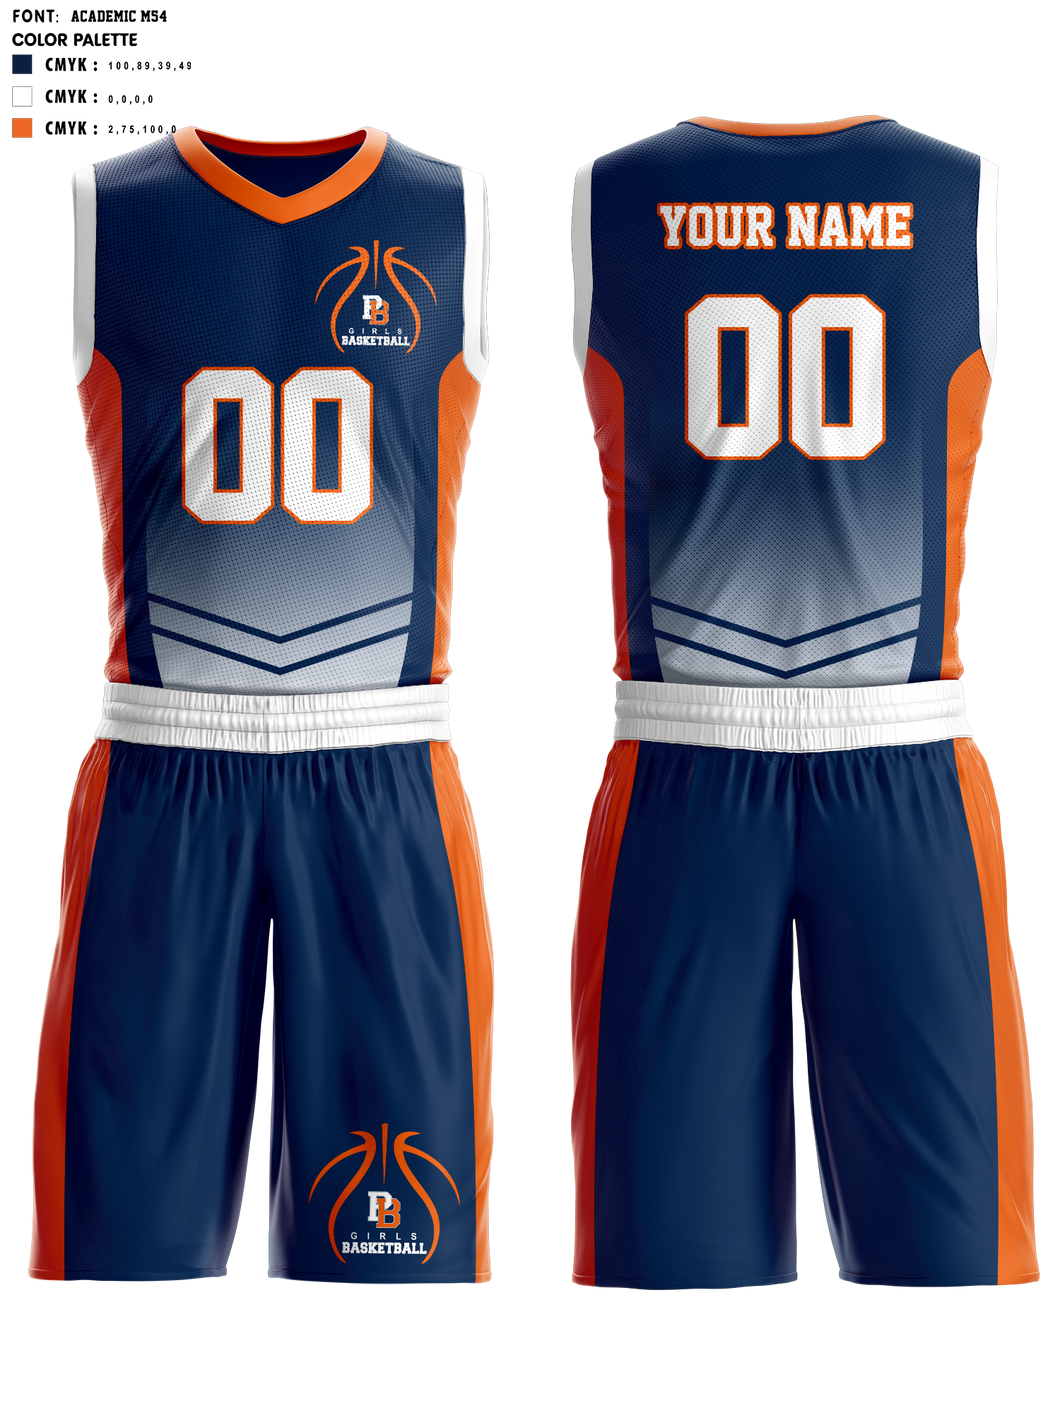 Sublimated Women's Basketball Jersey Top for Girls Basketball Teams